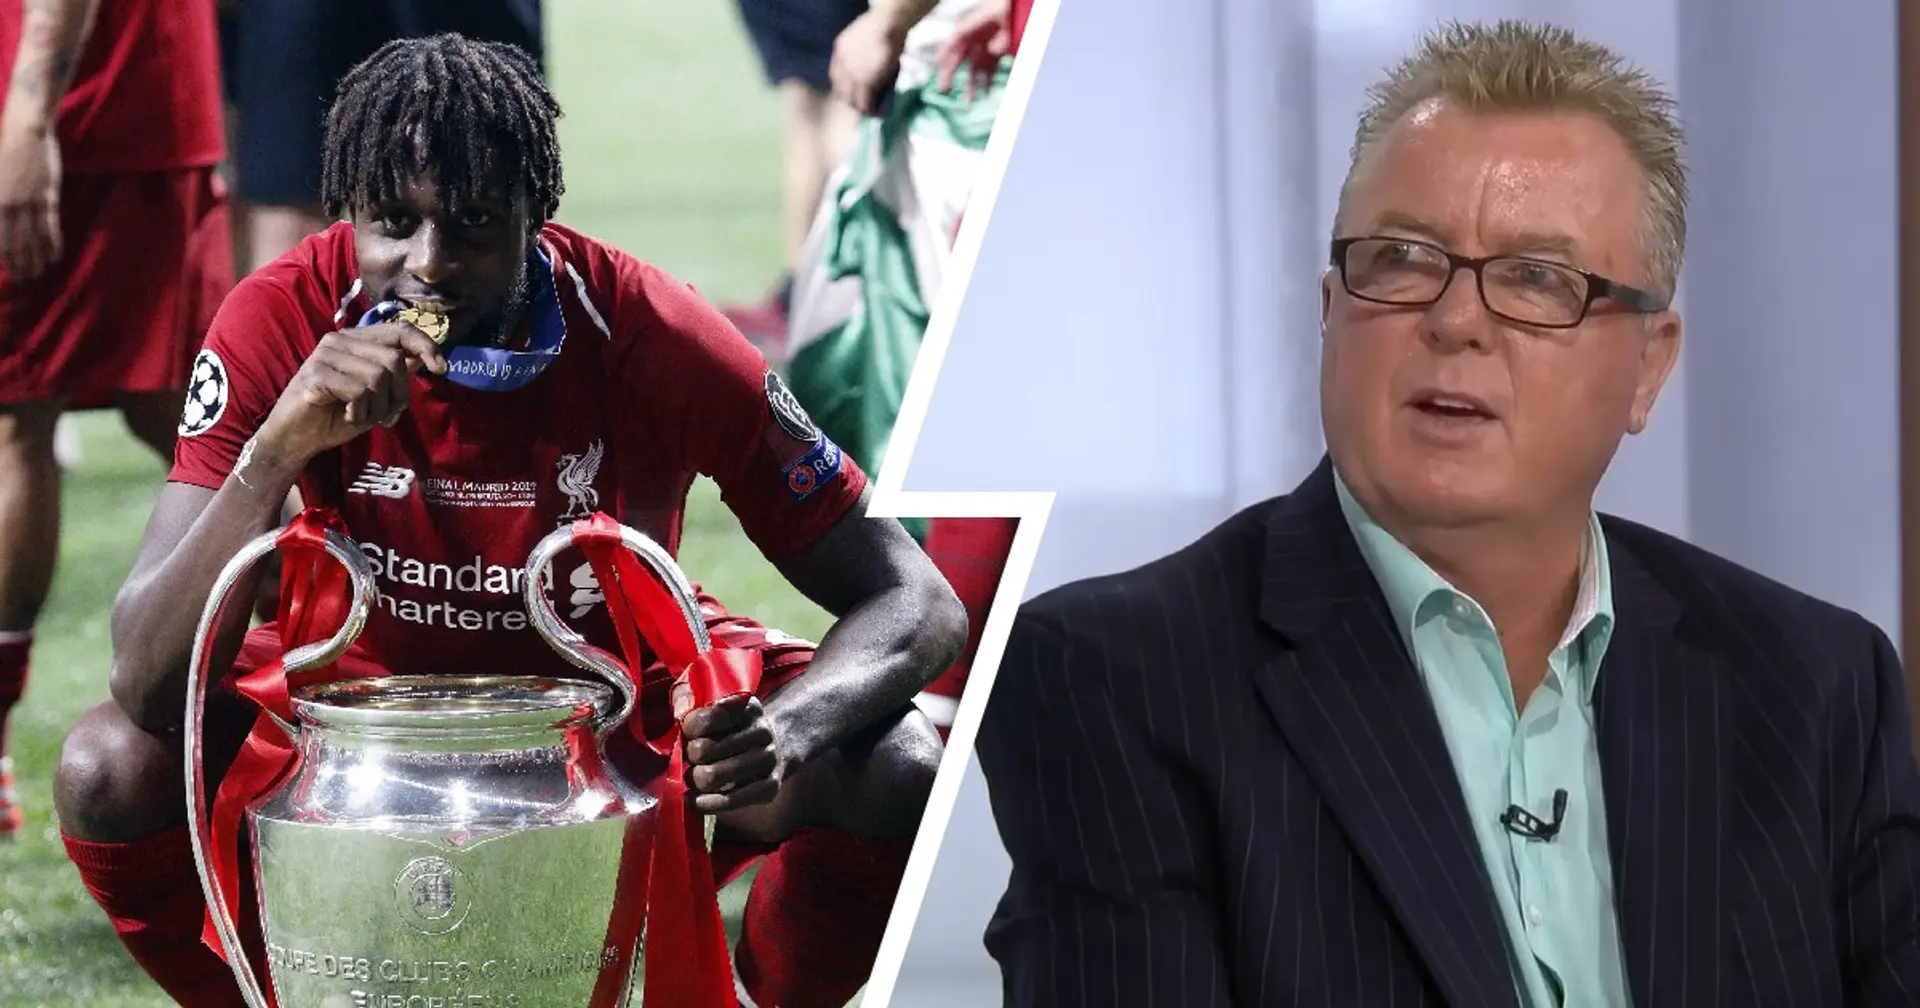 'He was horrendous': Steve Nicol launches tirade against Origi, says his game was 'garbage'  